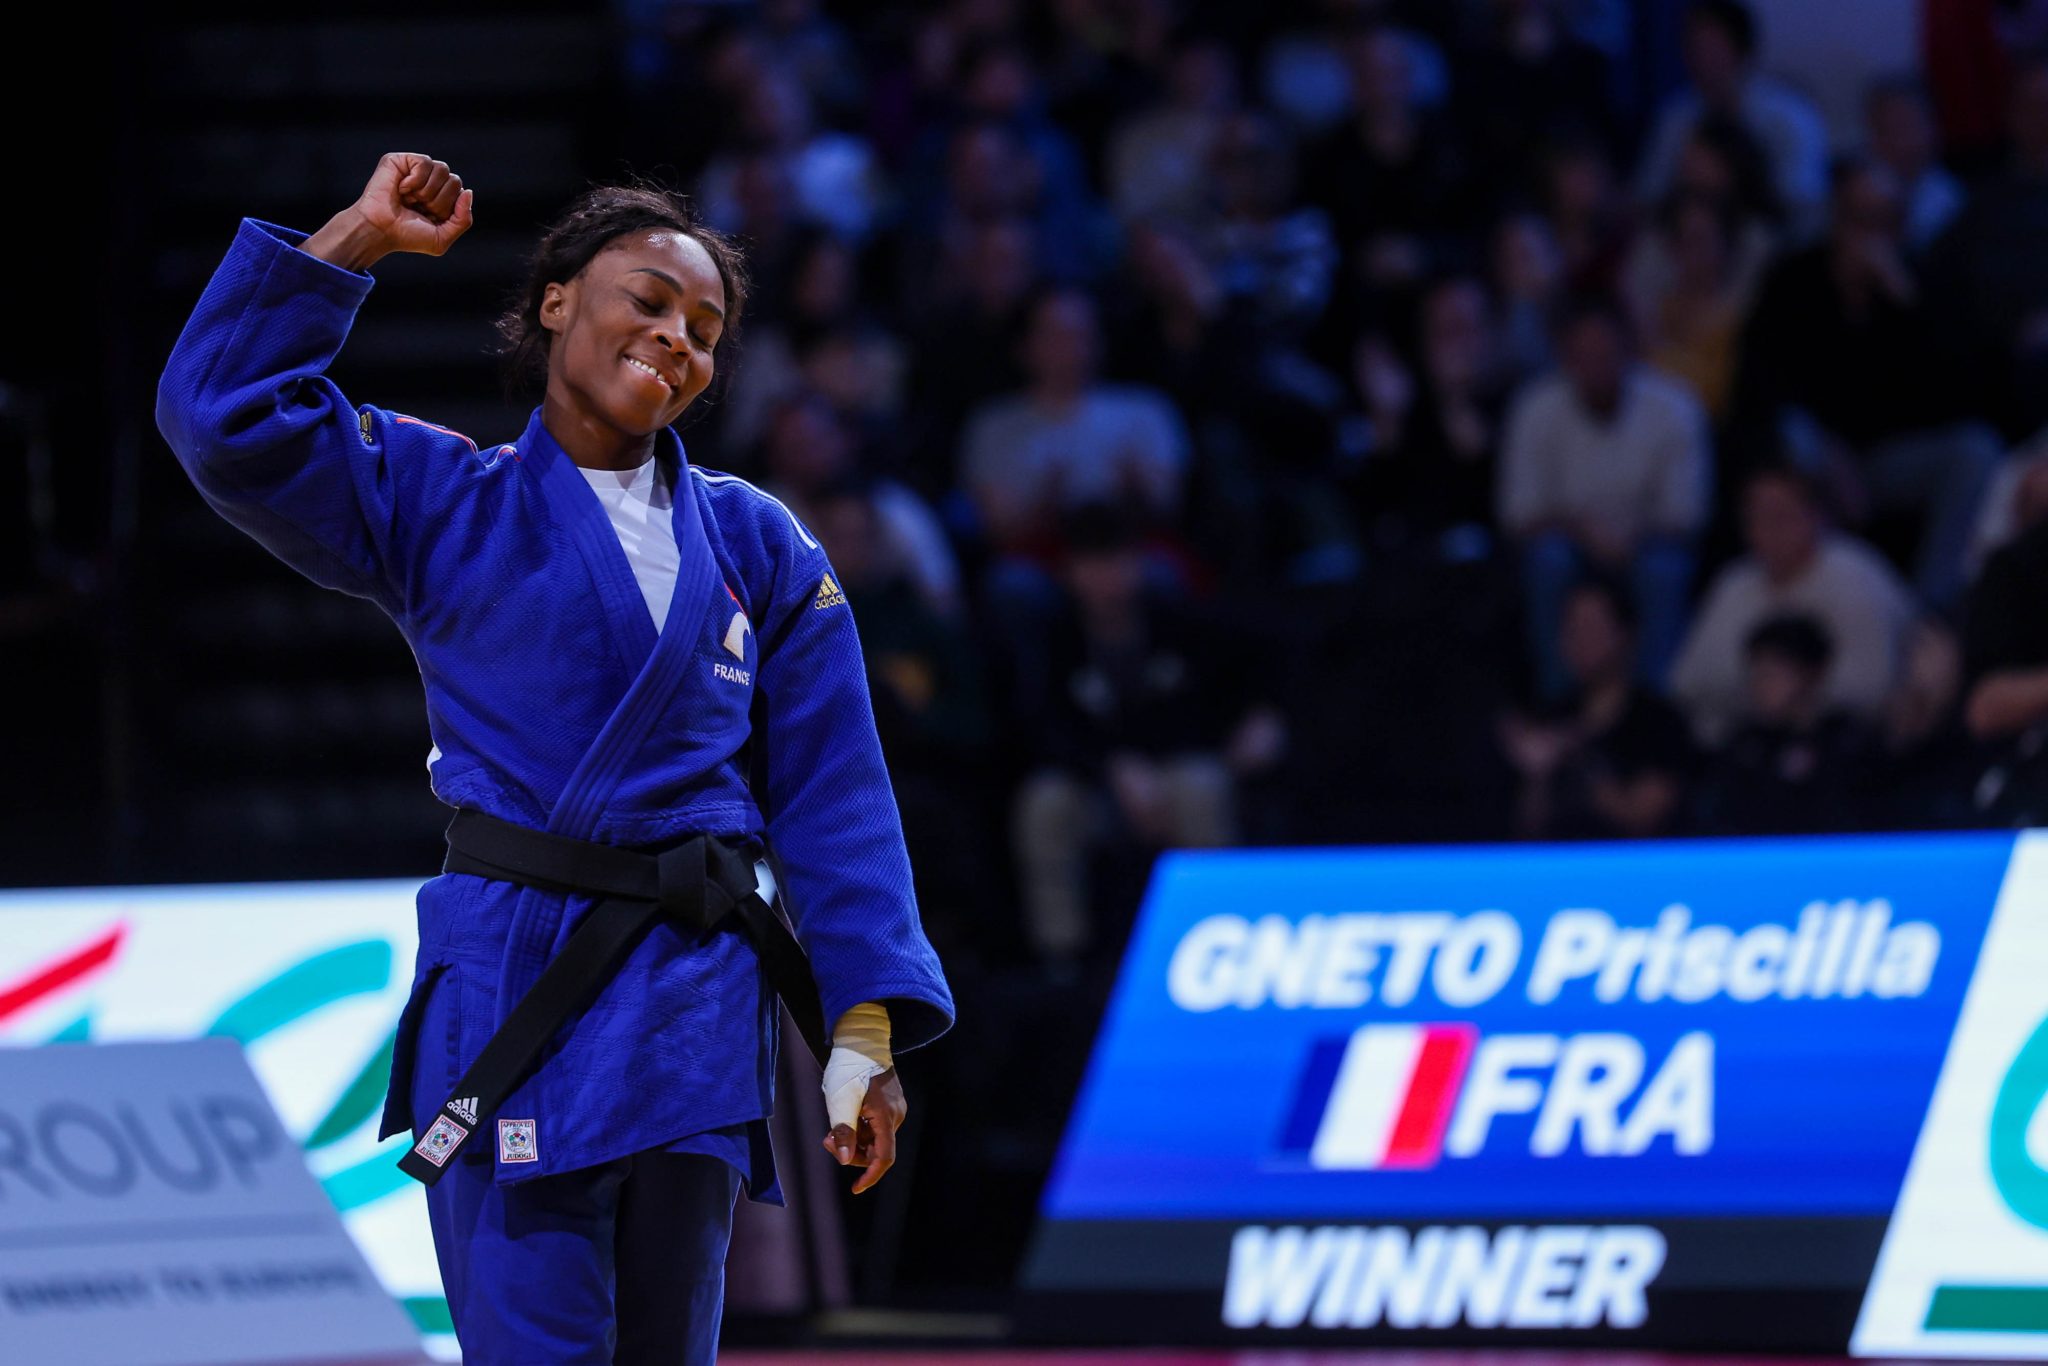 CLEAN SWEEP FOR EUROPE IN PARIS